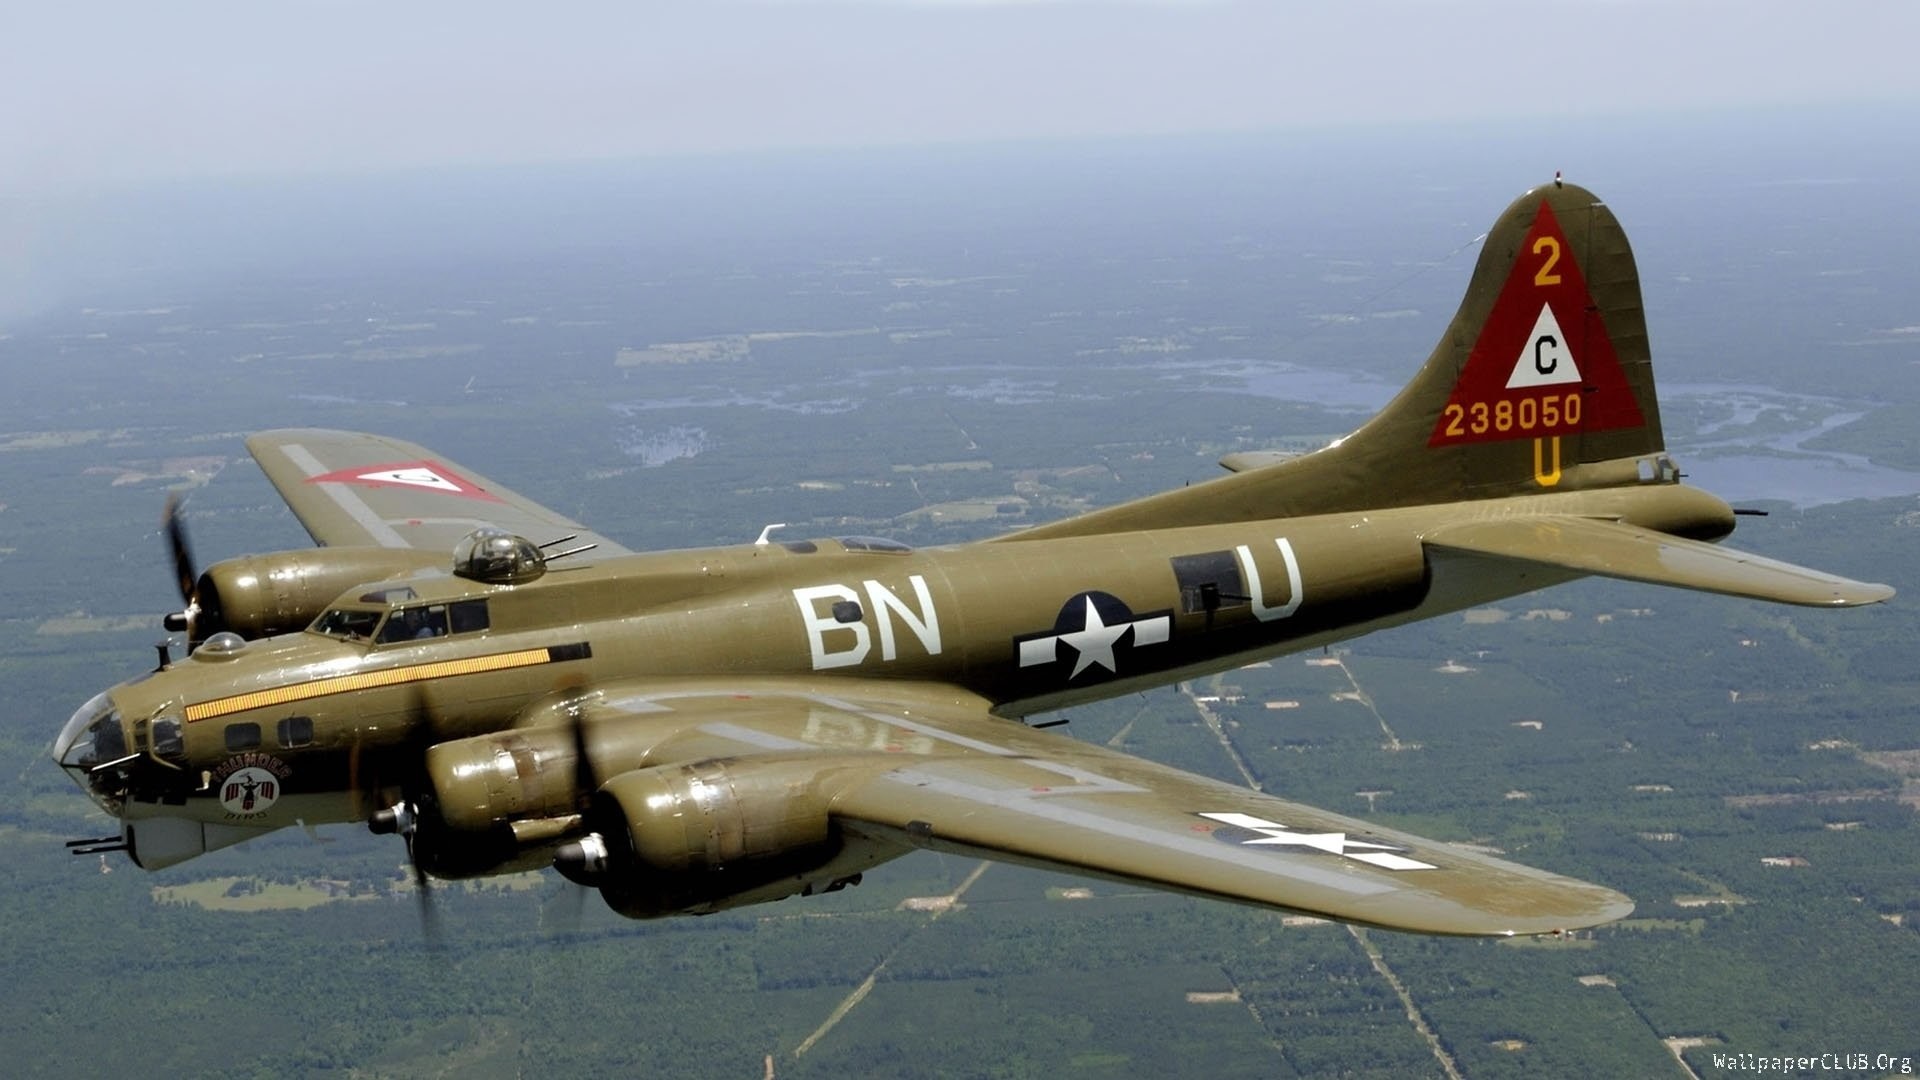 1920x1080 Military - Boeing B-17 Flying Fortress Air Force Aircraft Airplane Wallpaper